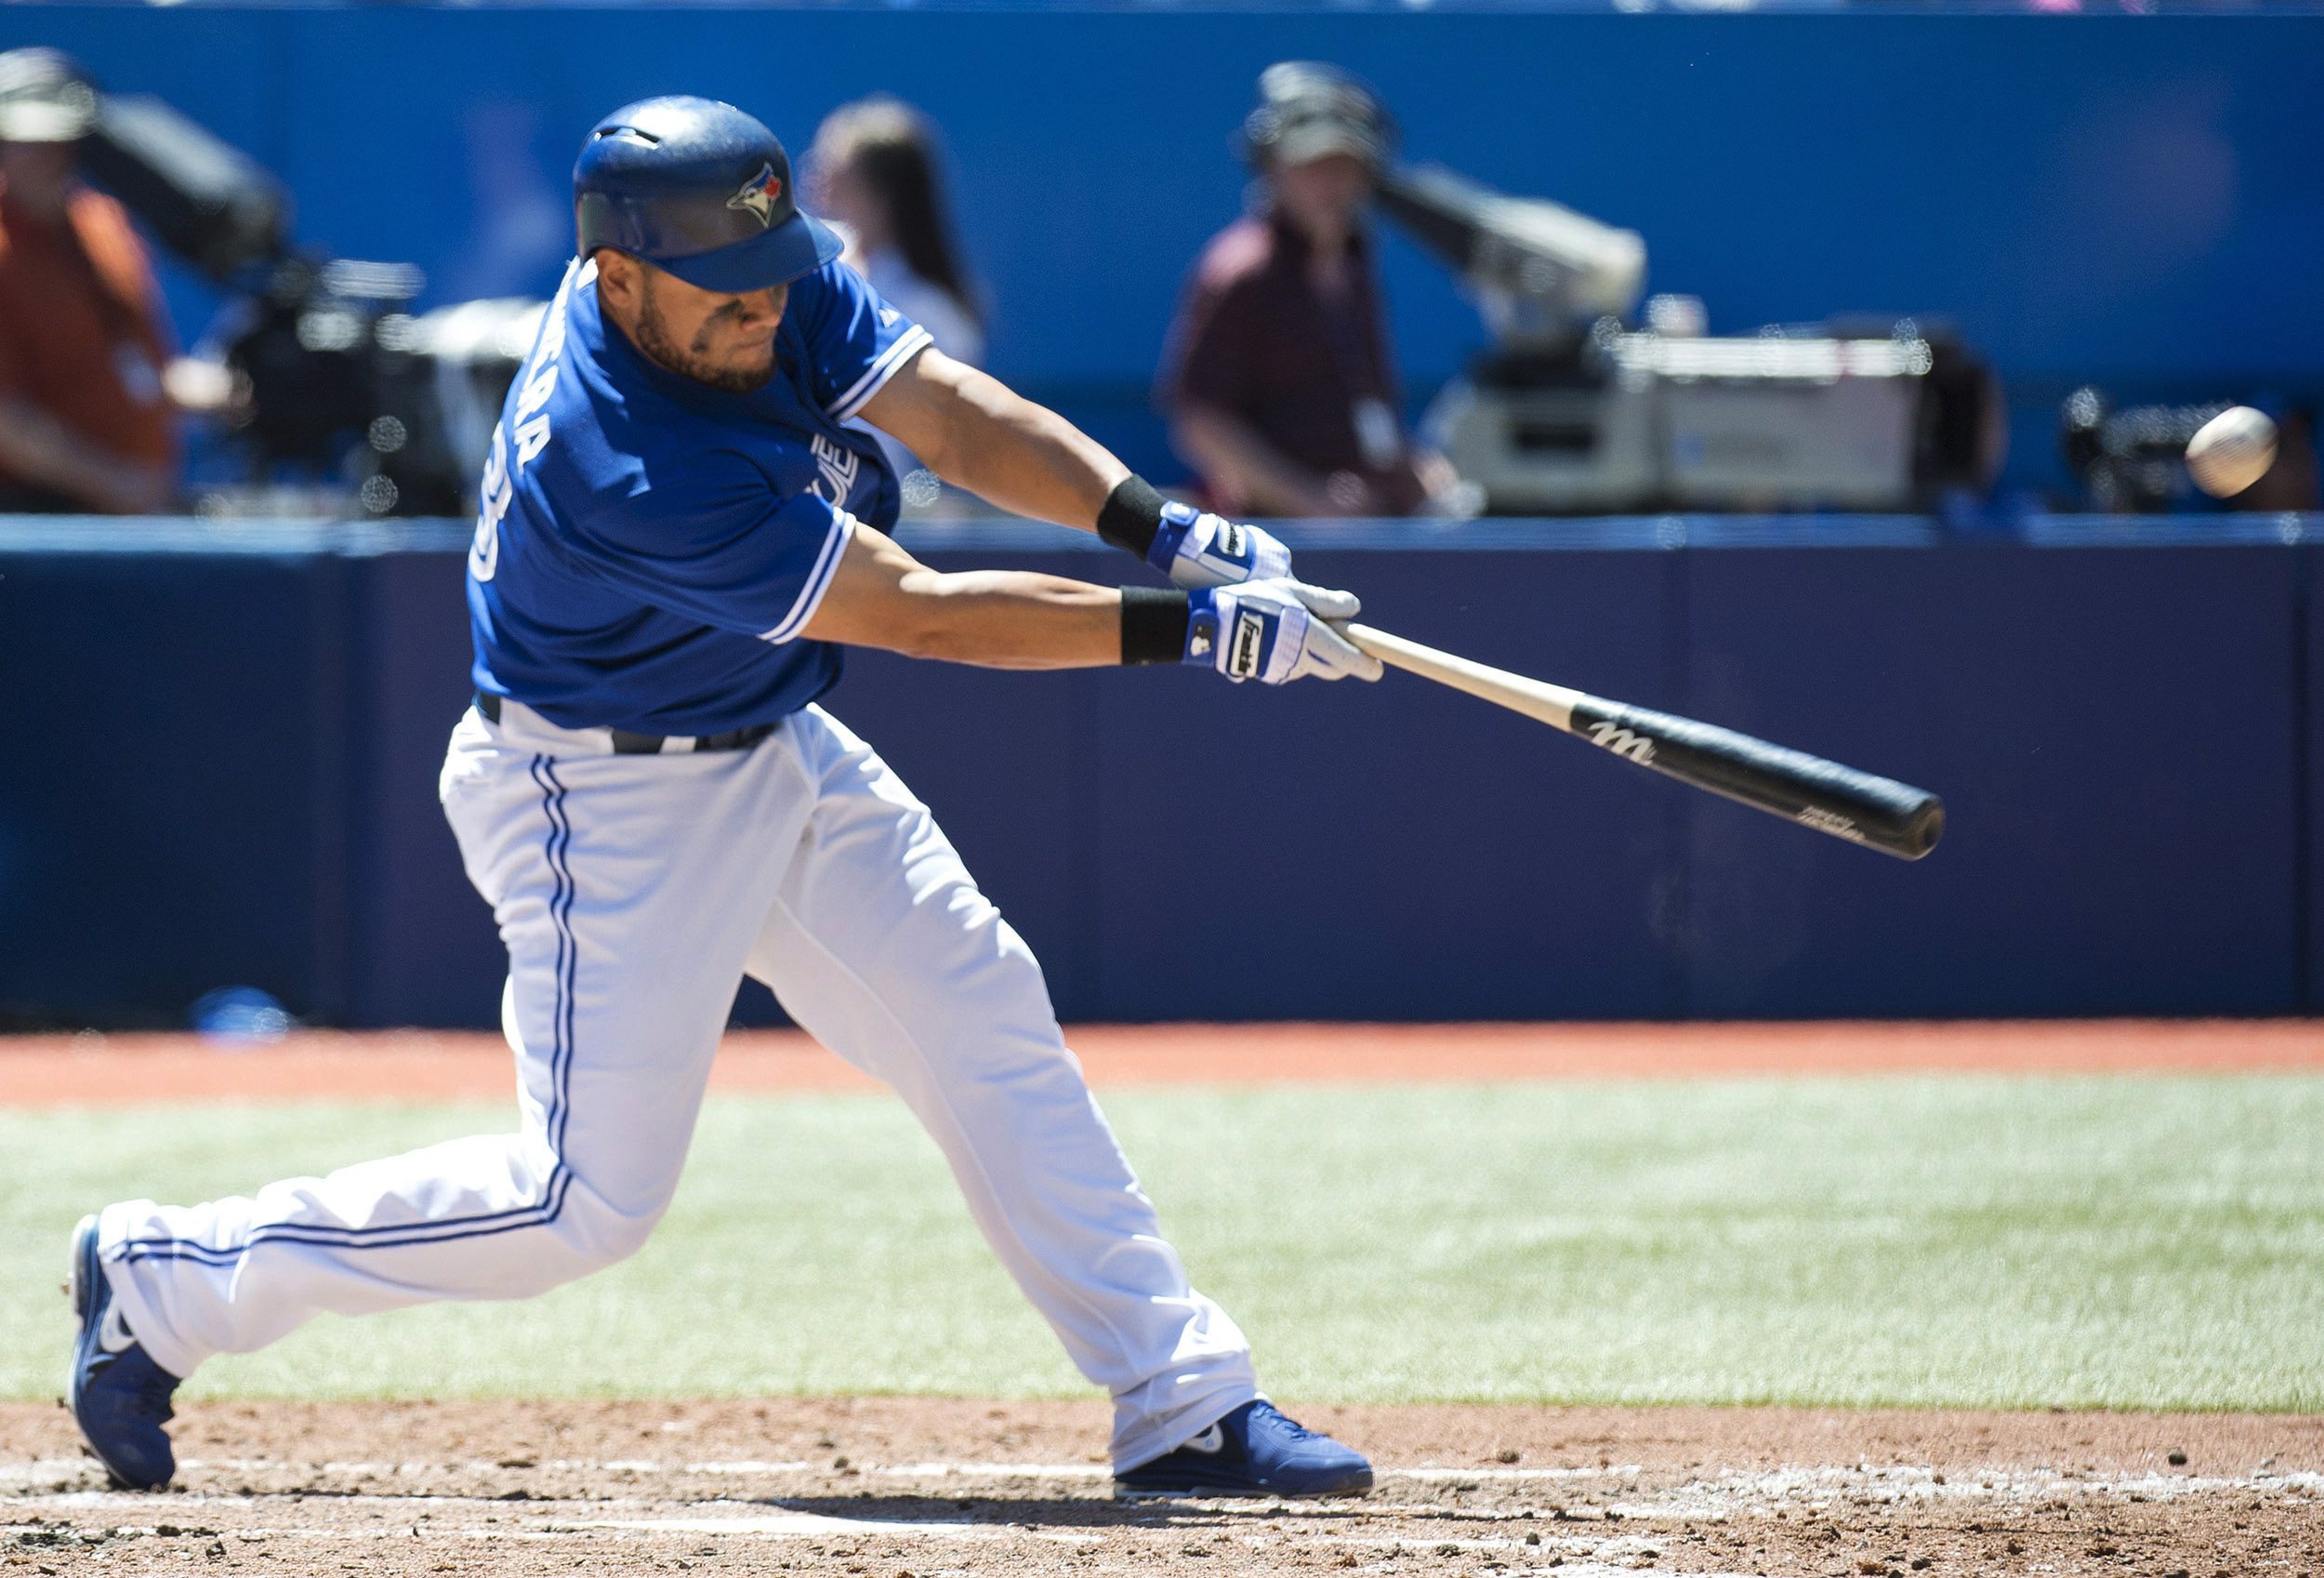 Toronto's Melky Cabrera hits a solo home run in the fifth inning Sunday.